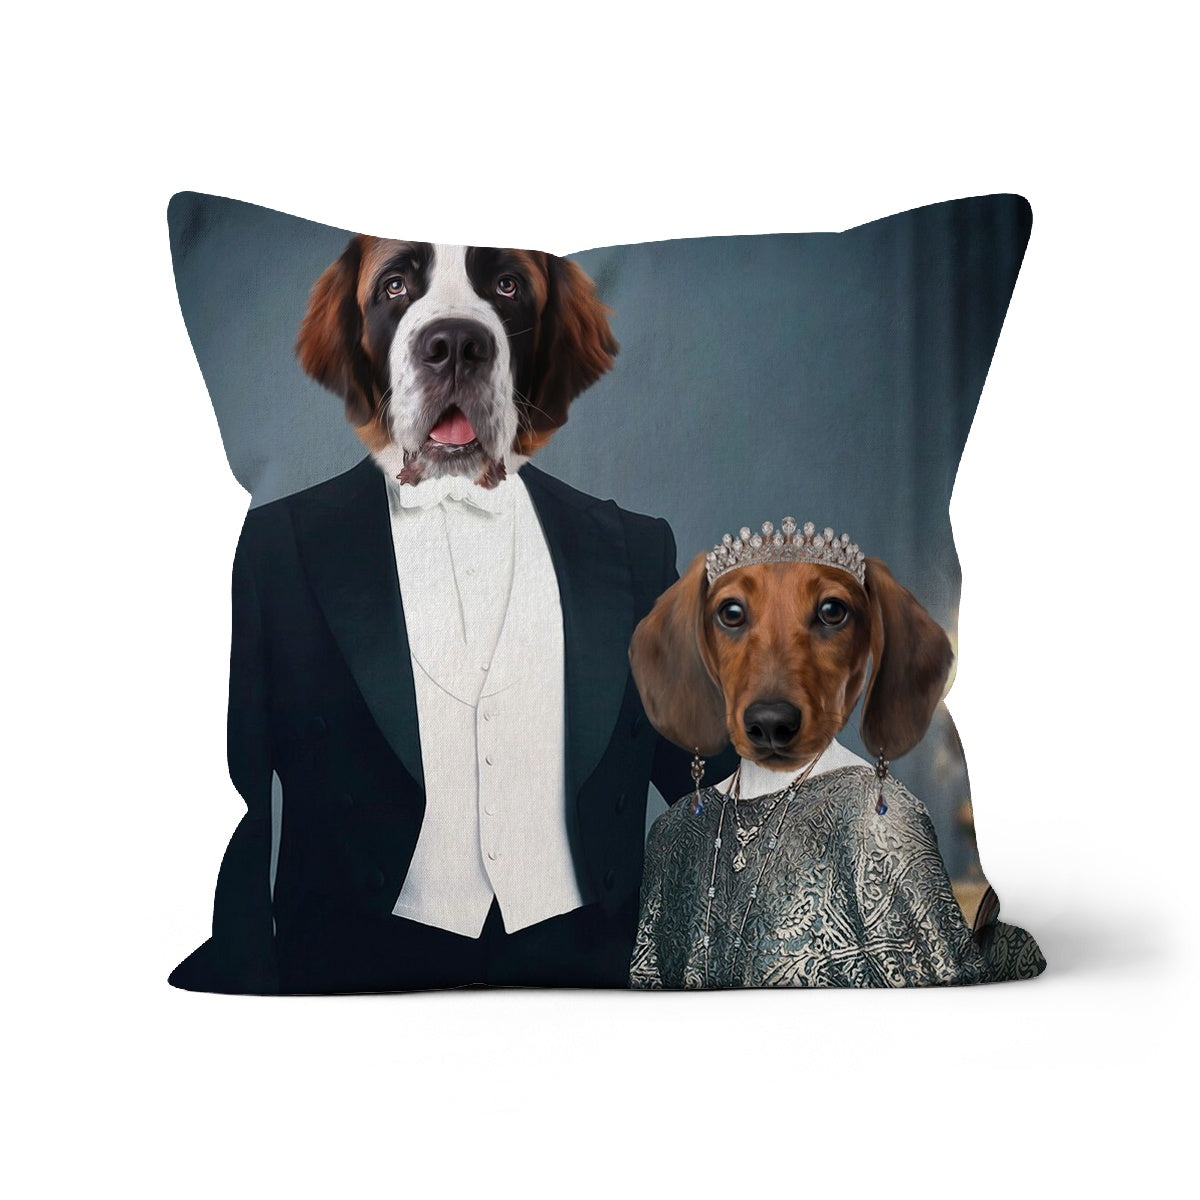 Robert & Cora (Downton Abbey Inspired): Custom Pet Pillow , Paw & Glory, paw and glory, personalised dog pillows, dog photo on pillow, pillow with dogs face, dog pillow cases, pillow custom, pet custom pillow